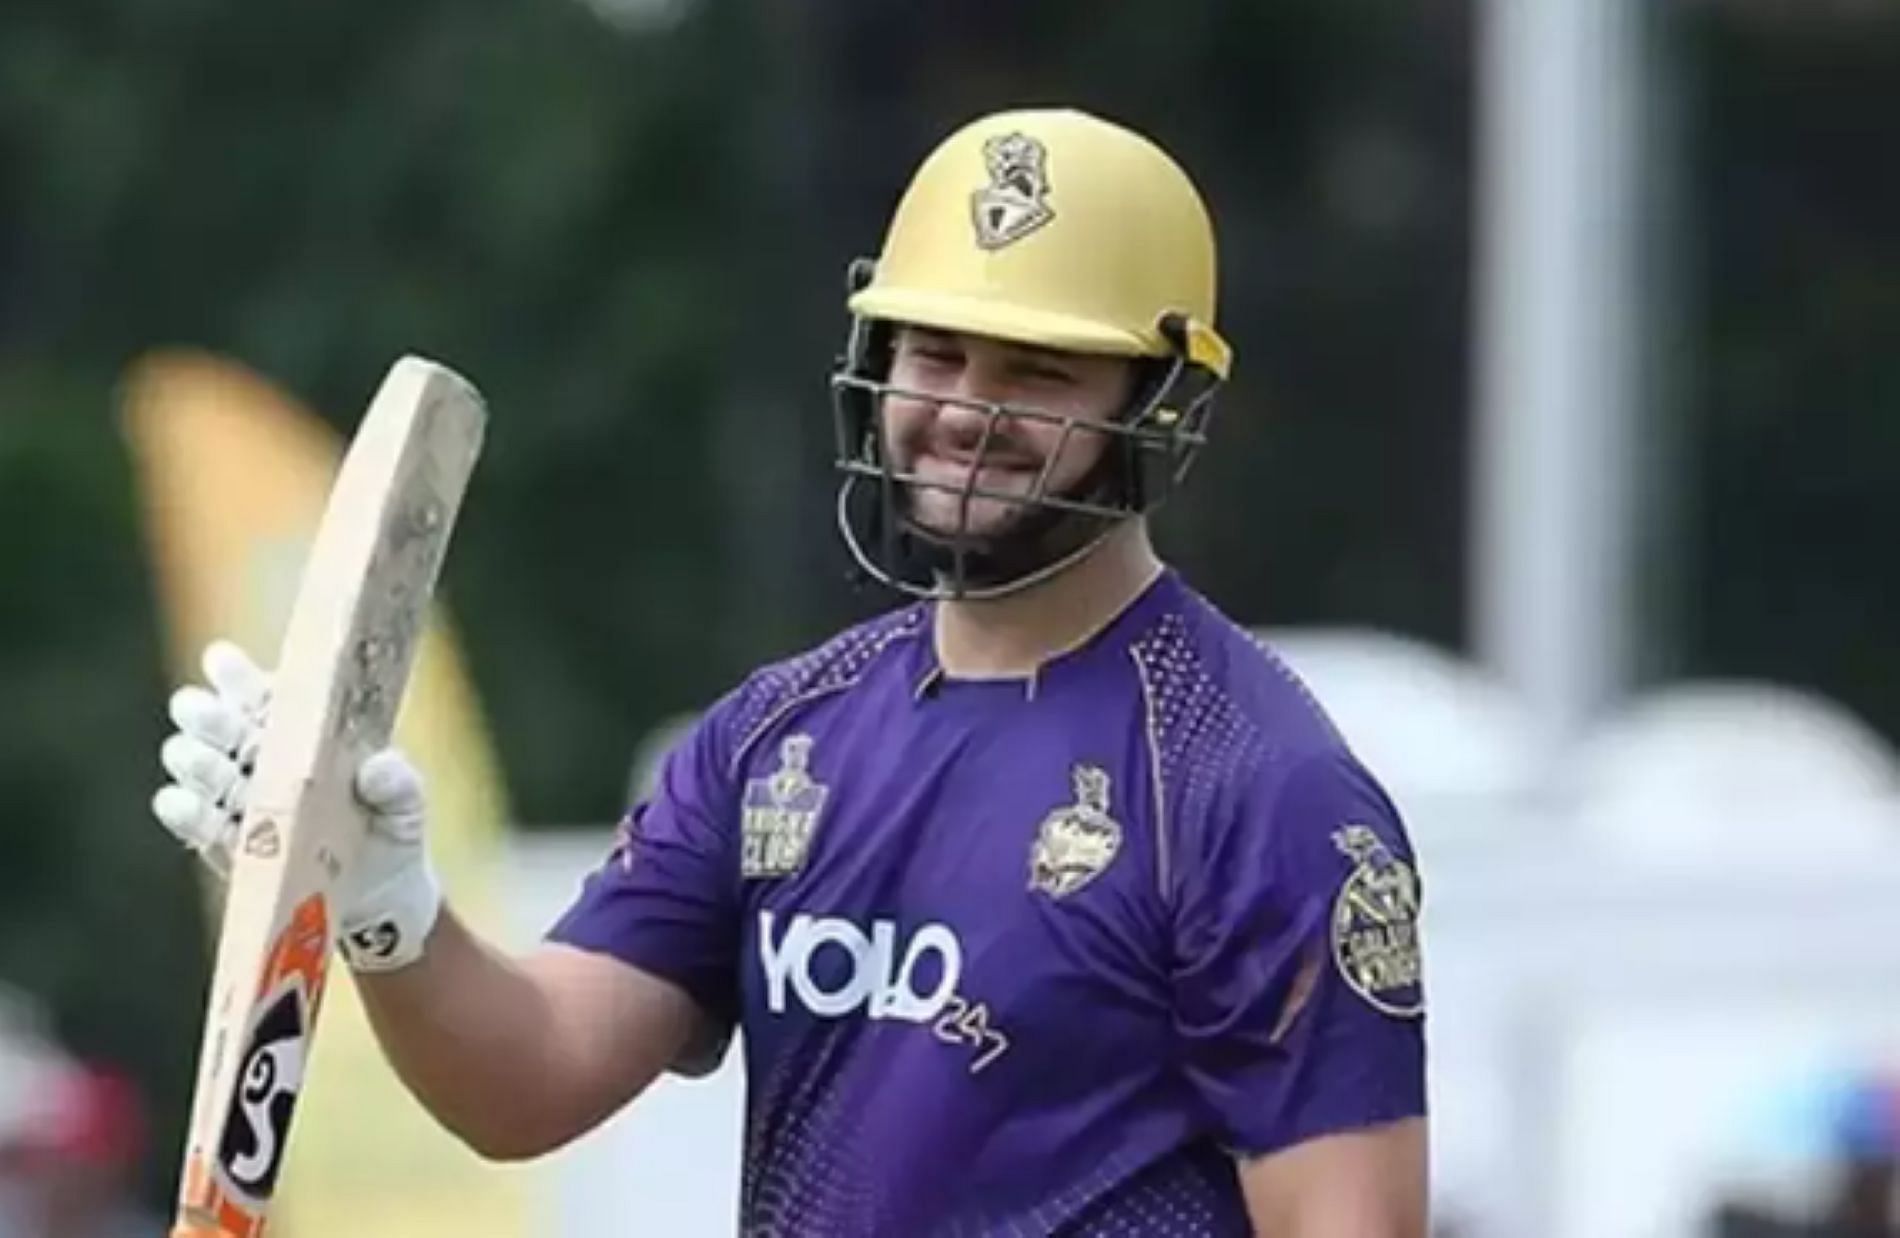 Rilee Rossouw was part of the Knight Riders in the inaugural MLC season.